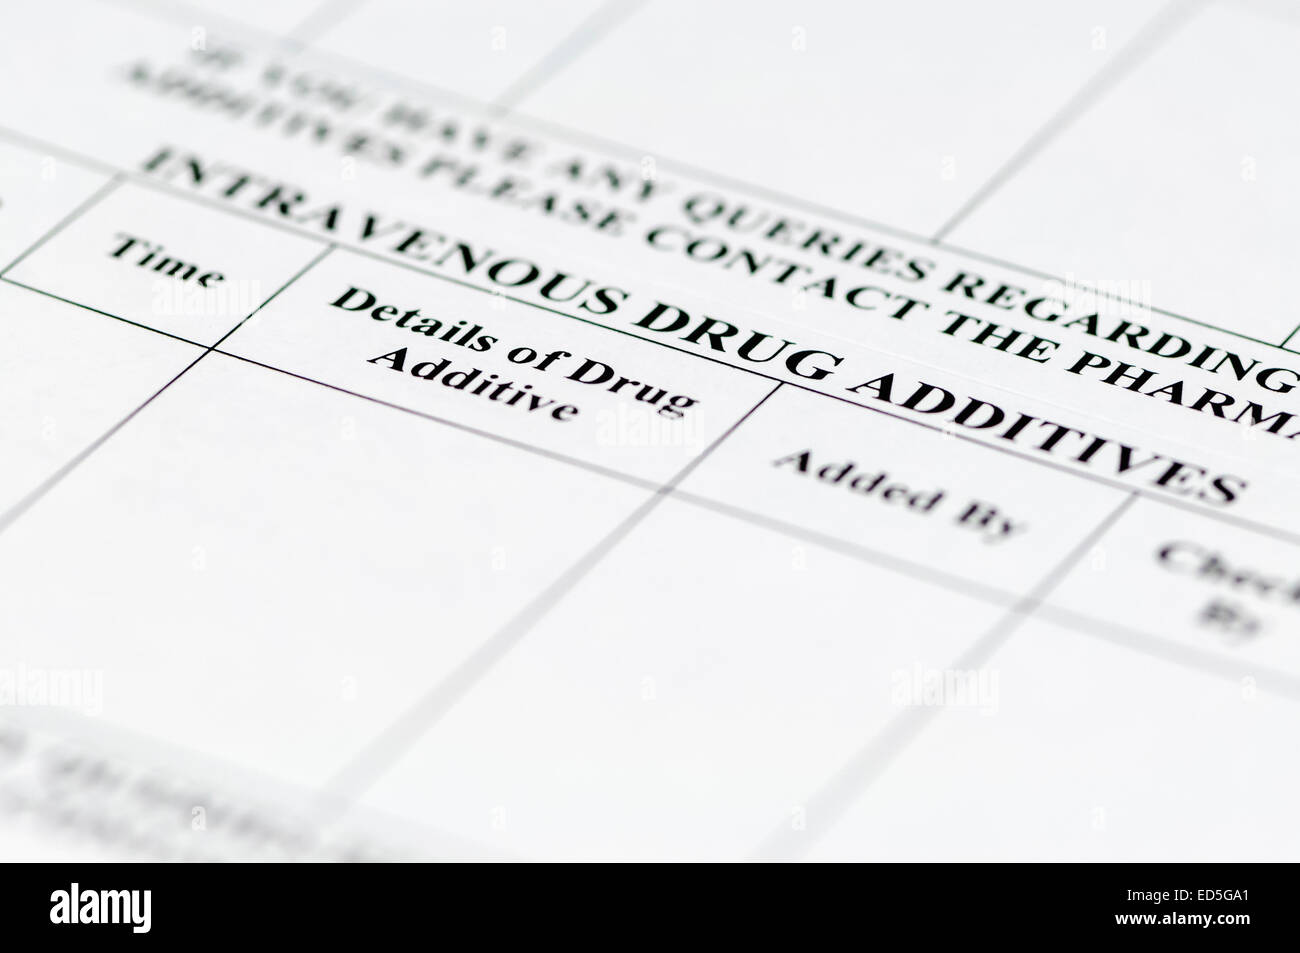 Labels used to record drug additives to standard intravenous infusions. Stock Photo